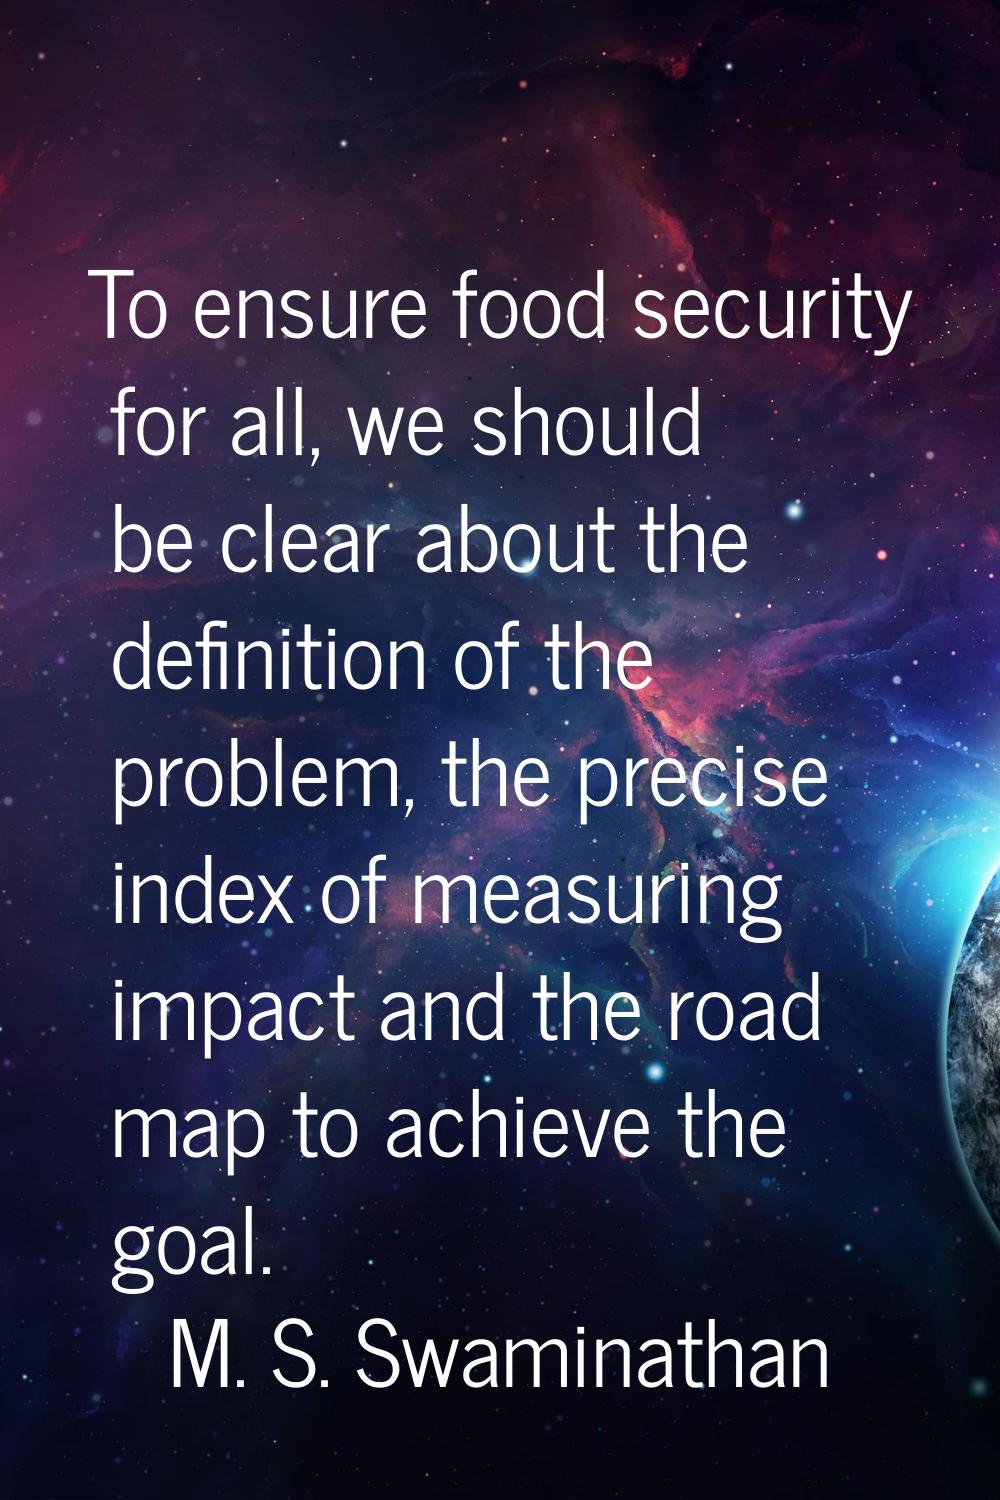 To ensure food security for all, we should be clear about the definition of the problem, the precis